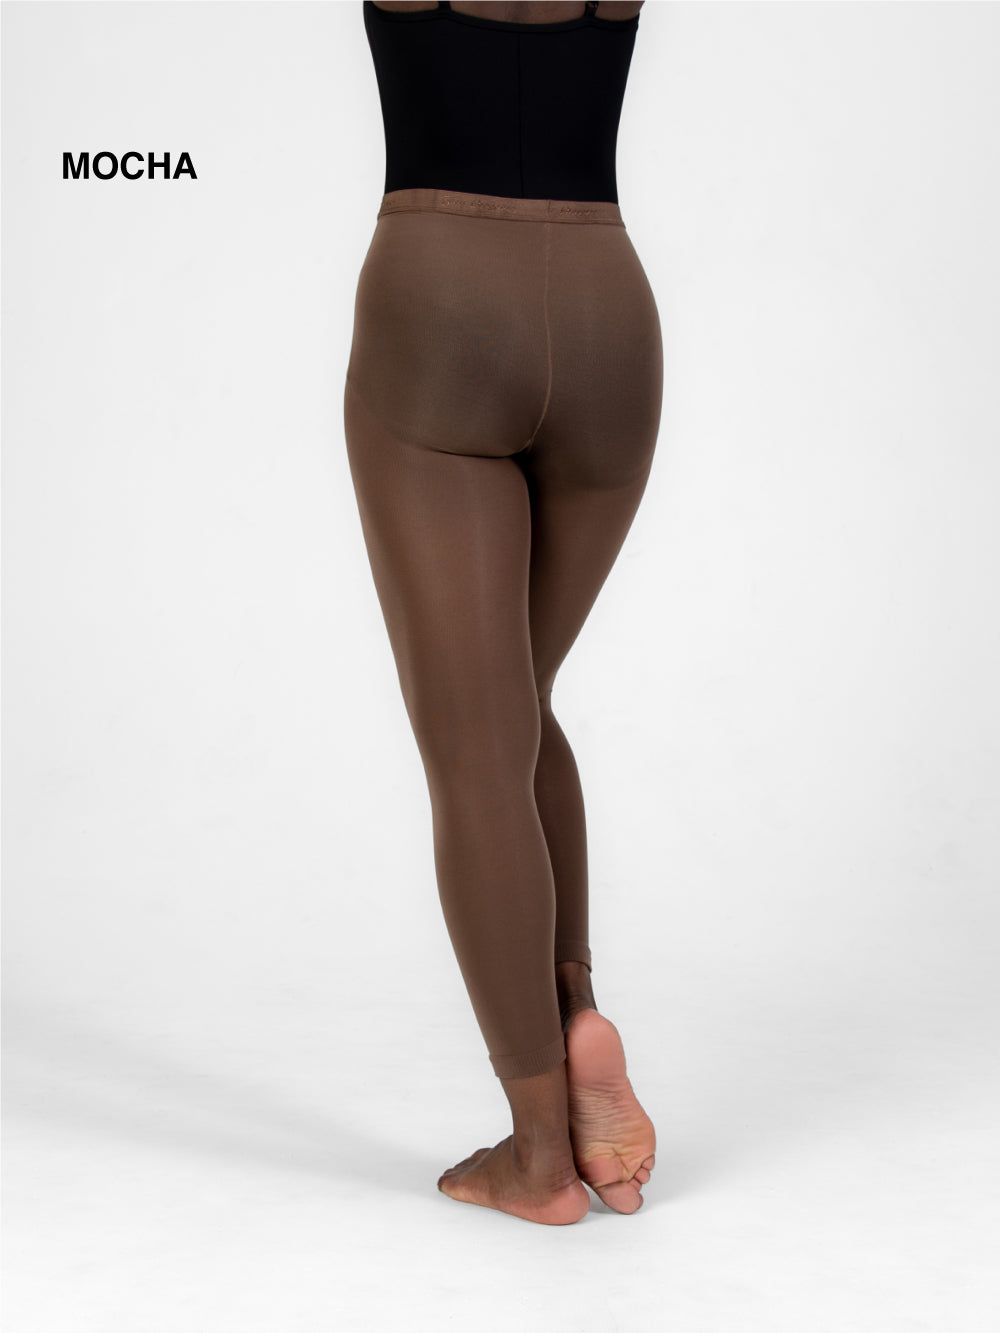 1pc Women's 200g Black Footless Tights Suitable For 5-15°c